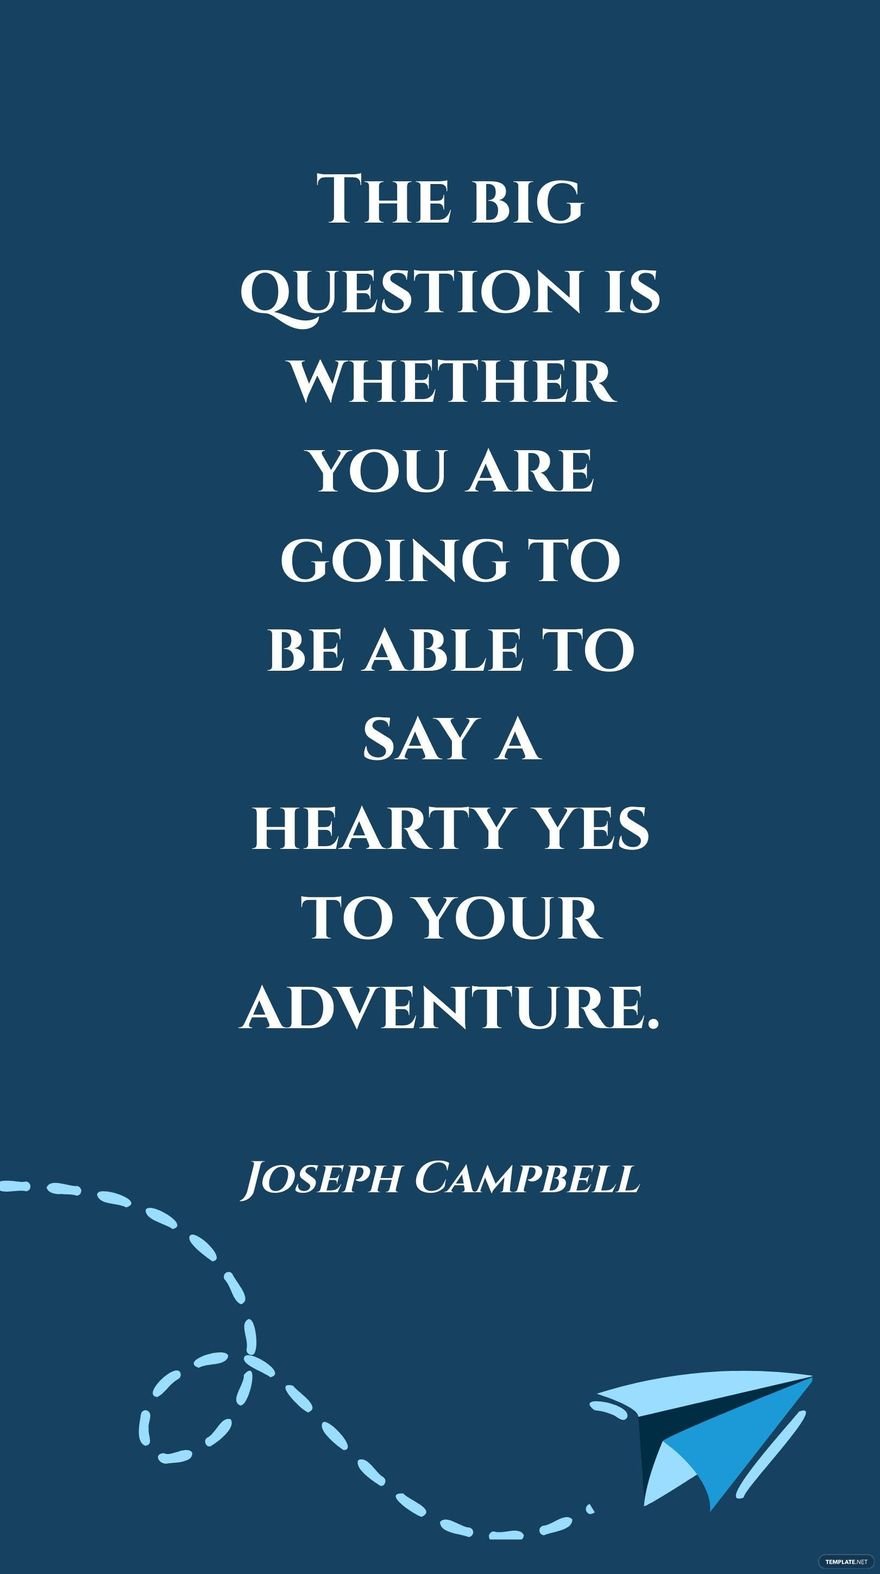 Free Joseph Campbell - The big question is whether you are going to be able to say a hearty yes to your adventure. in JPG